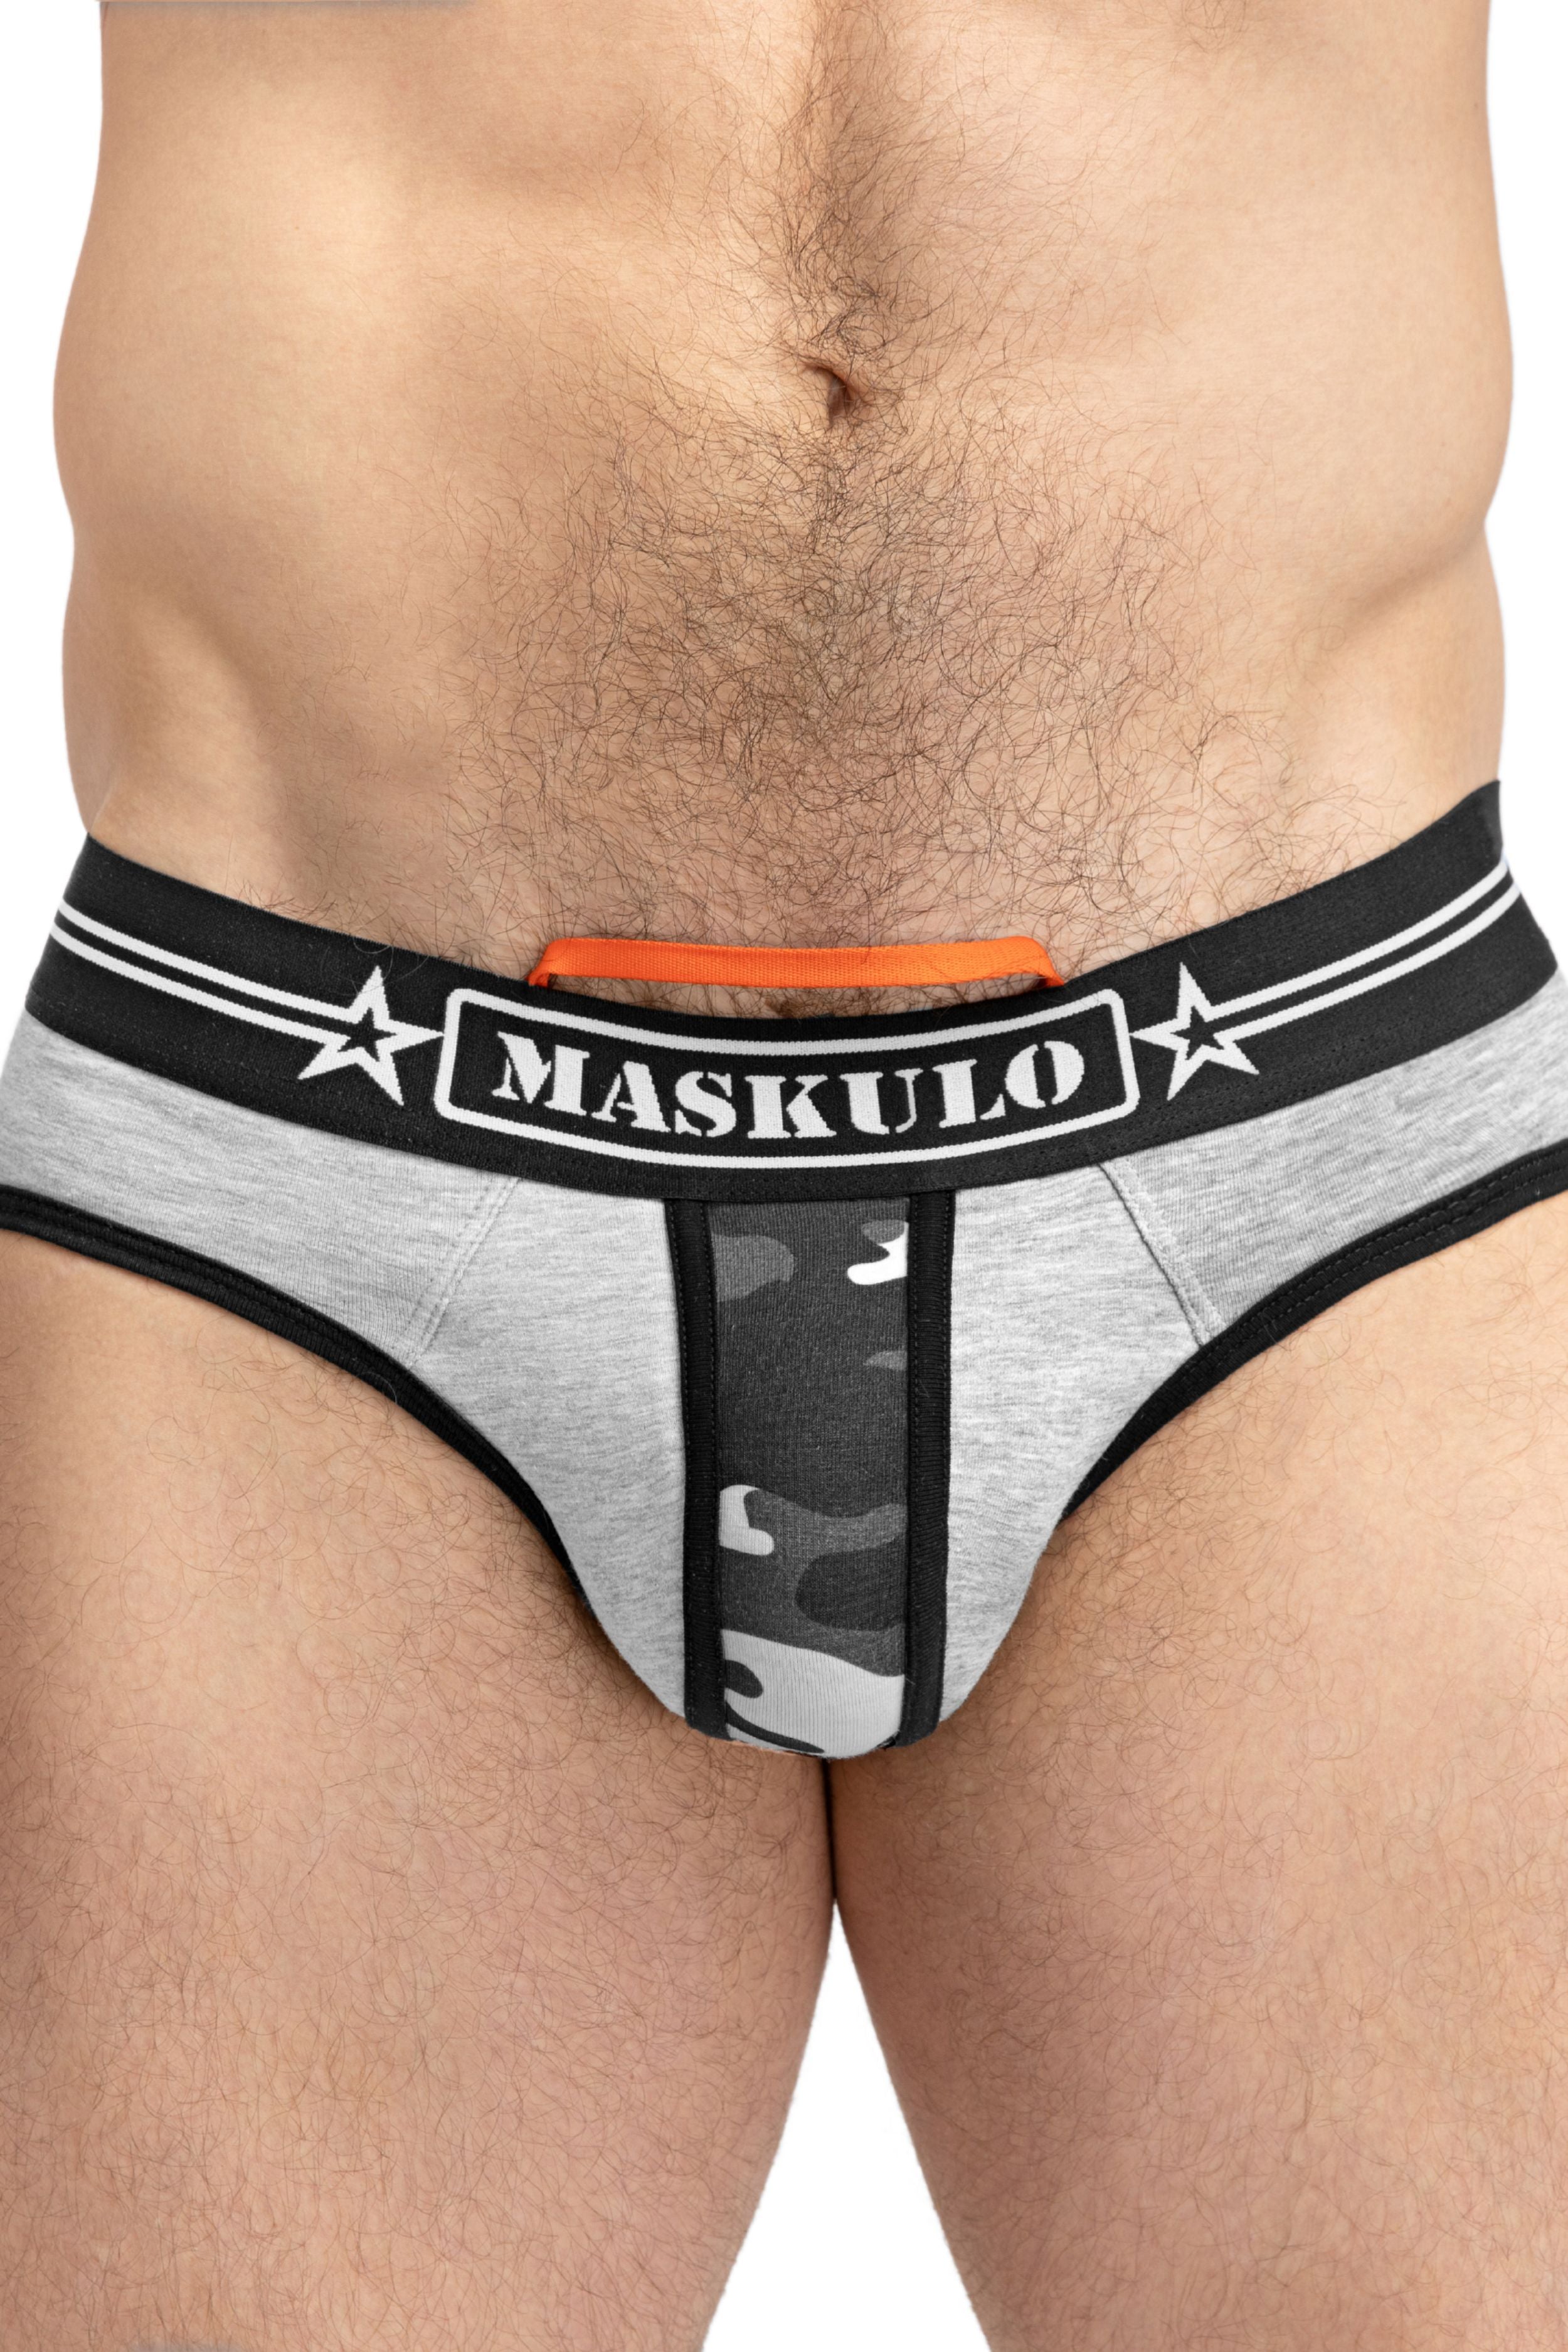 Military Briefs with Lifter. Grey+Black